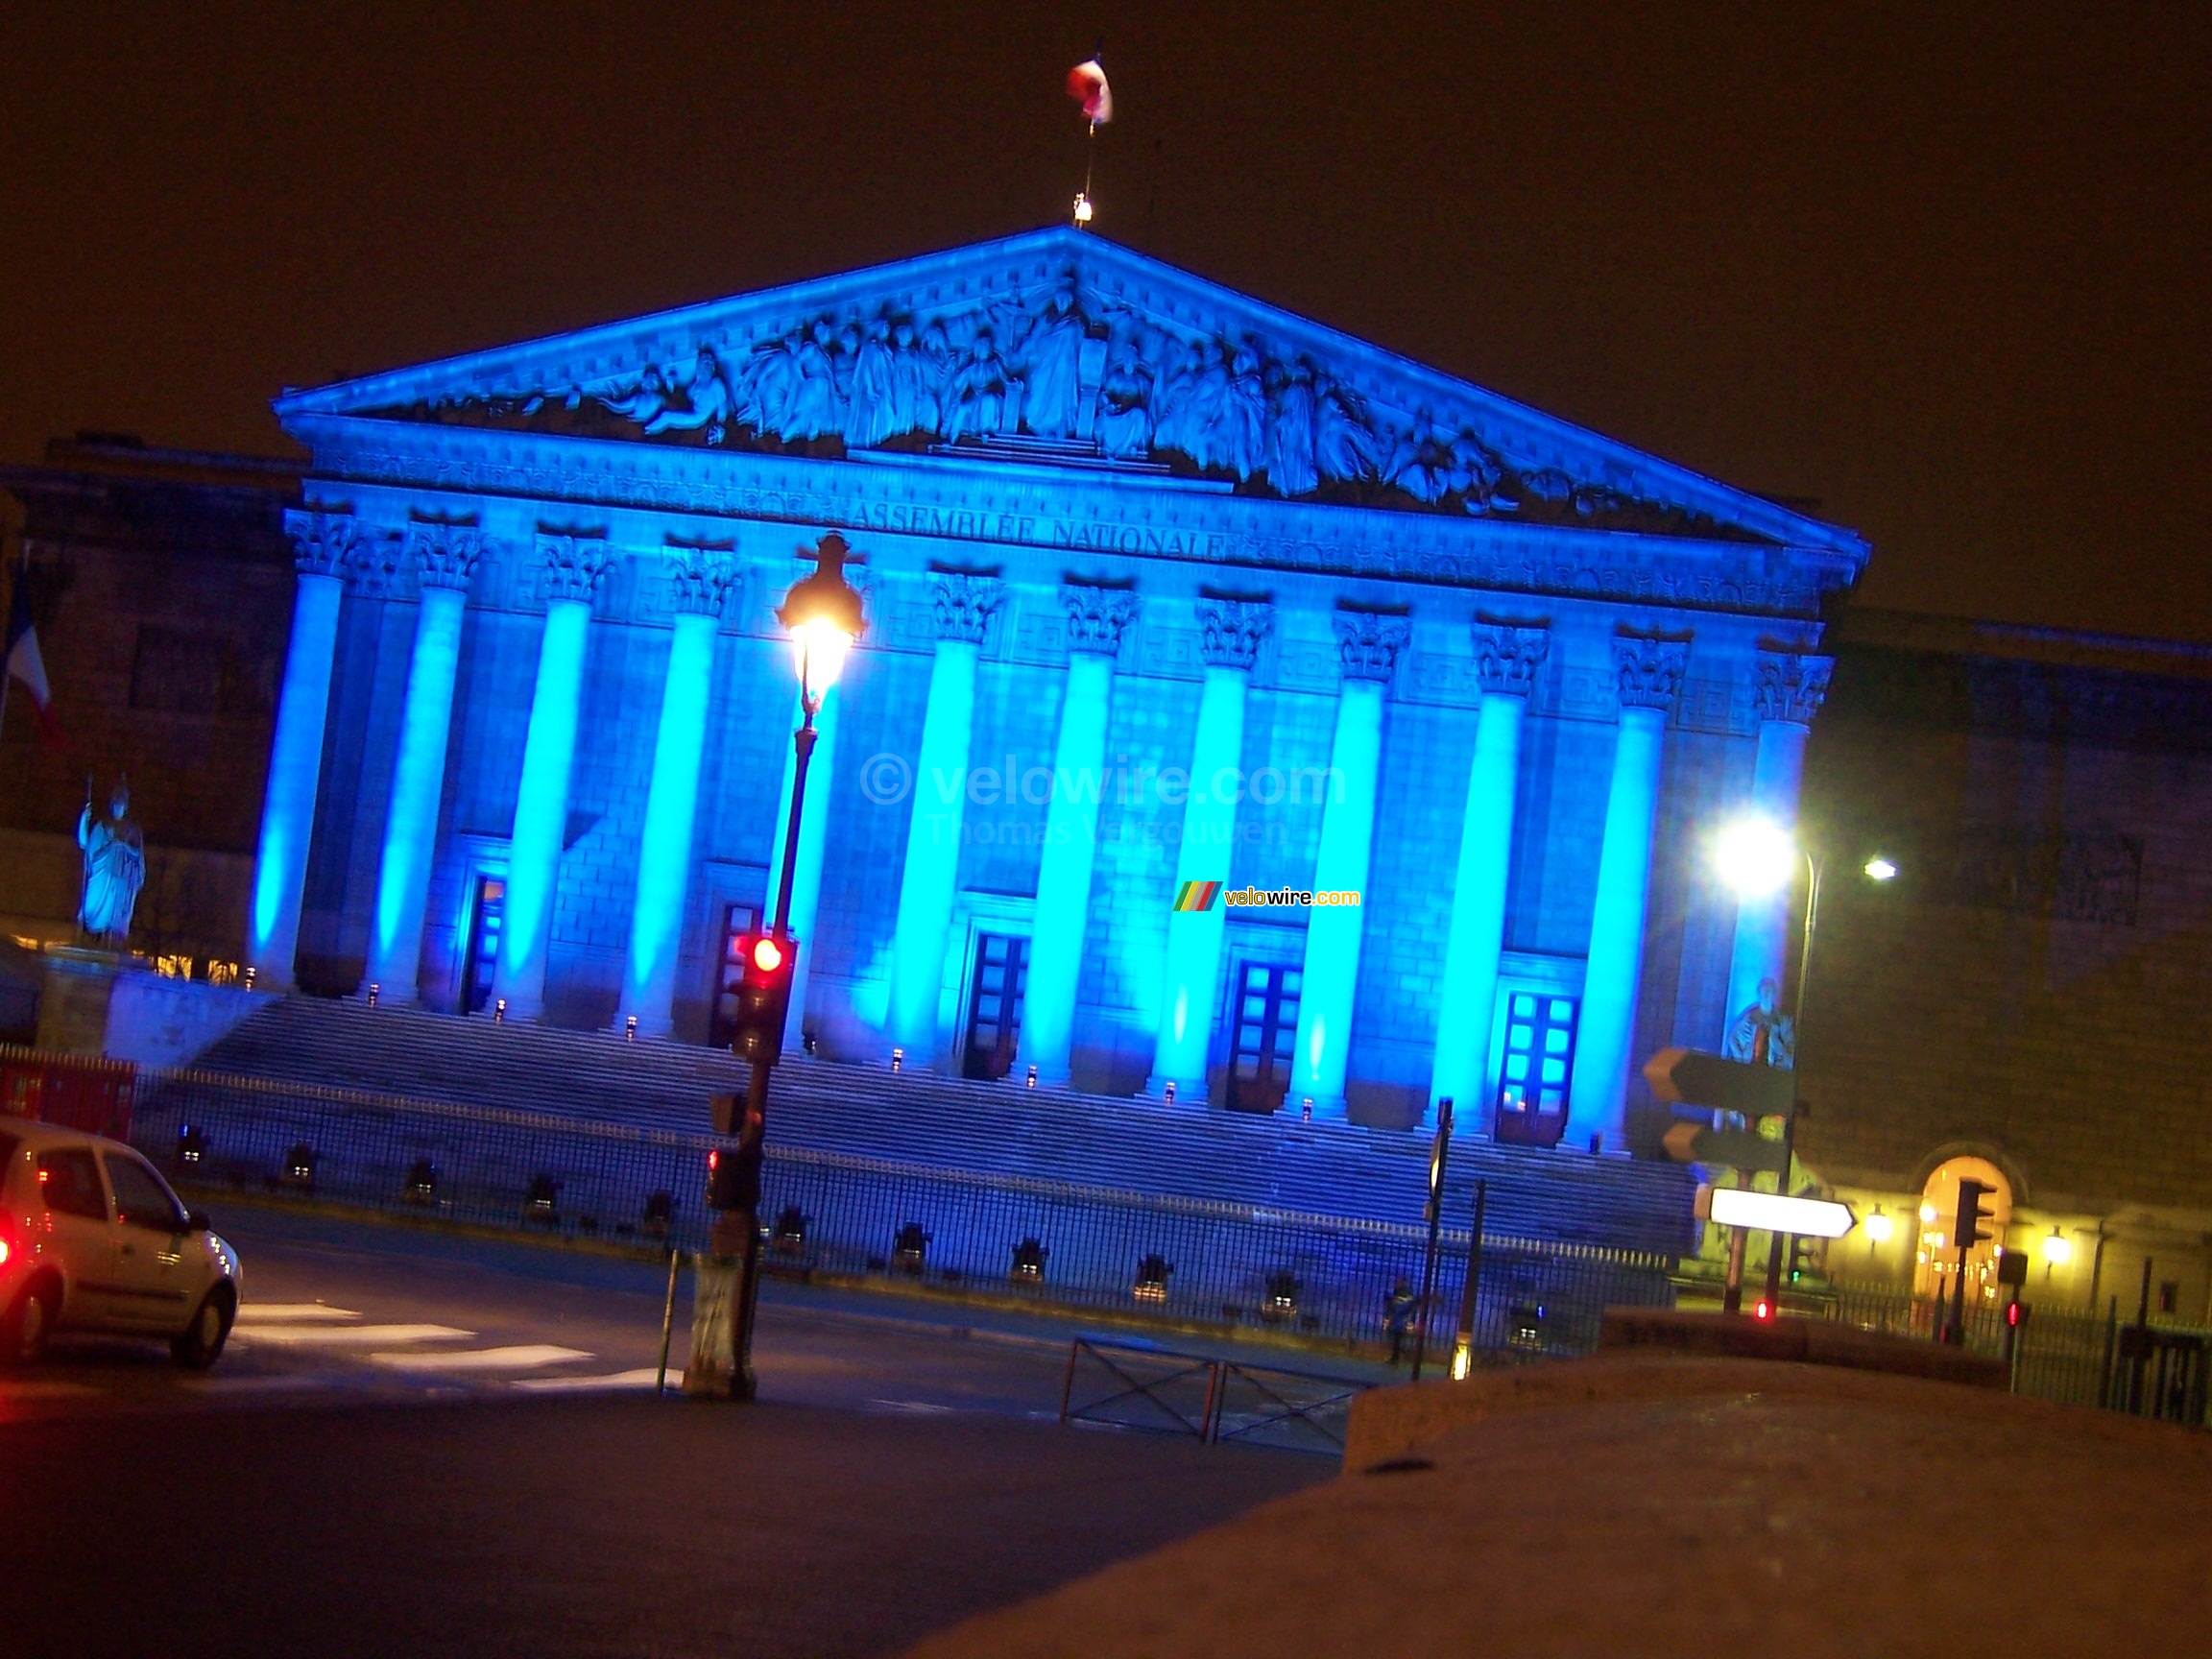 The blue lighting of the Assemble Nationale